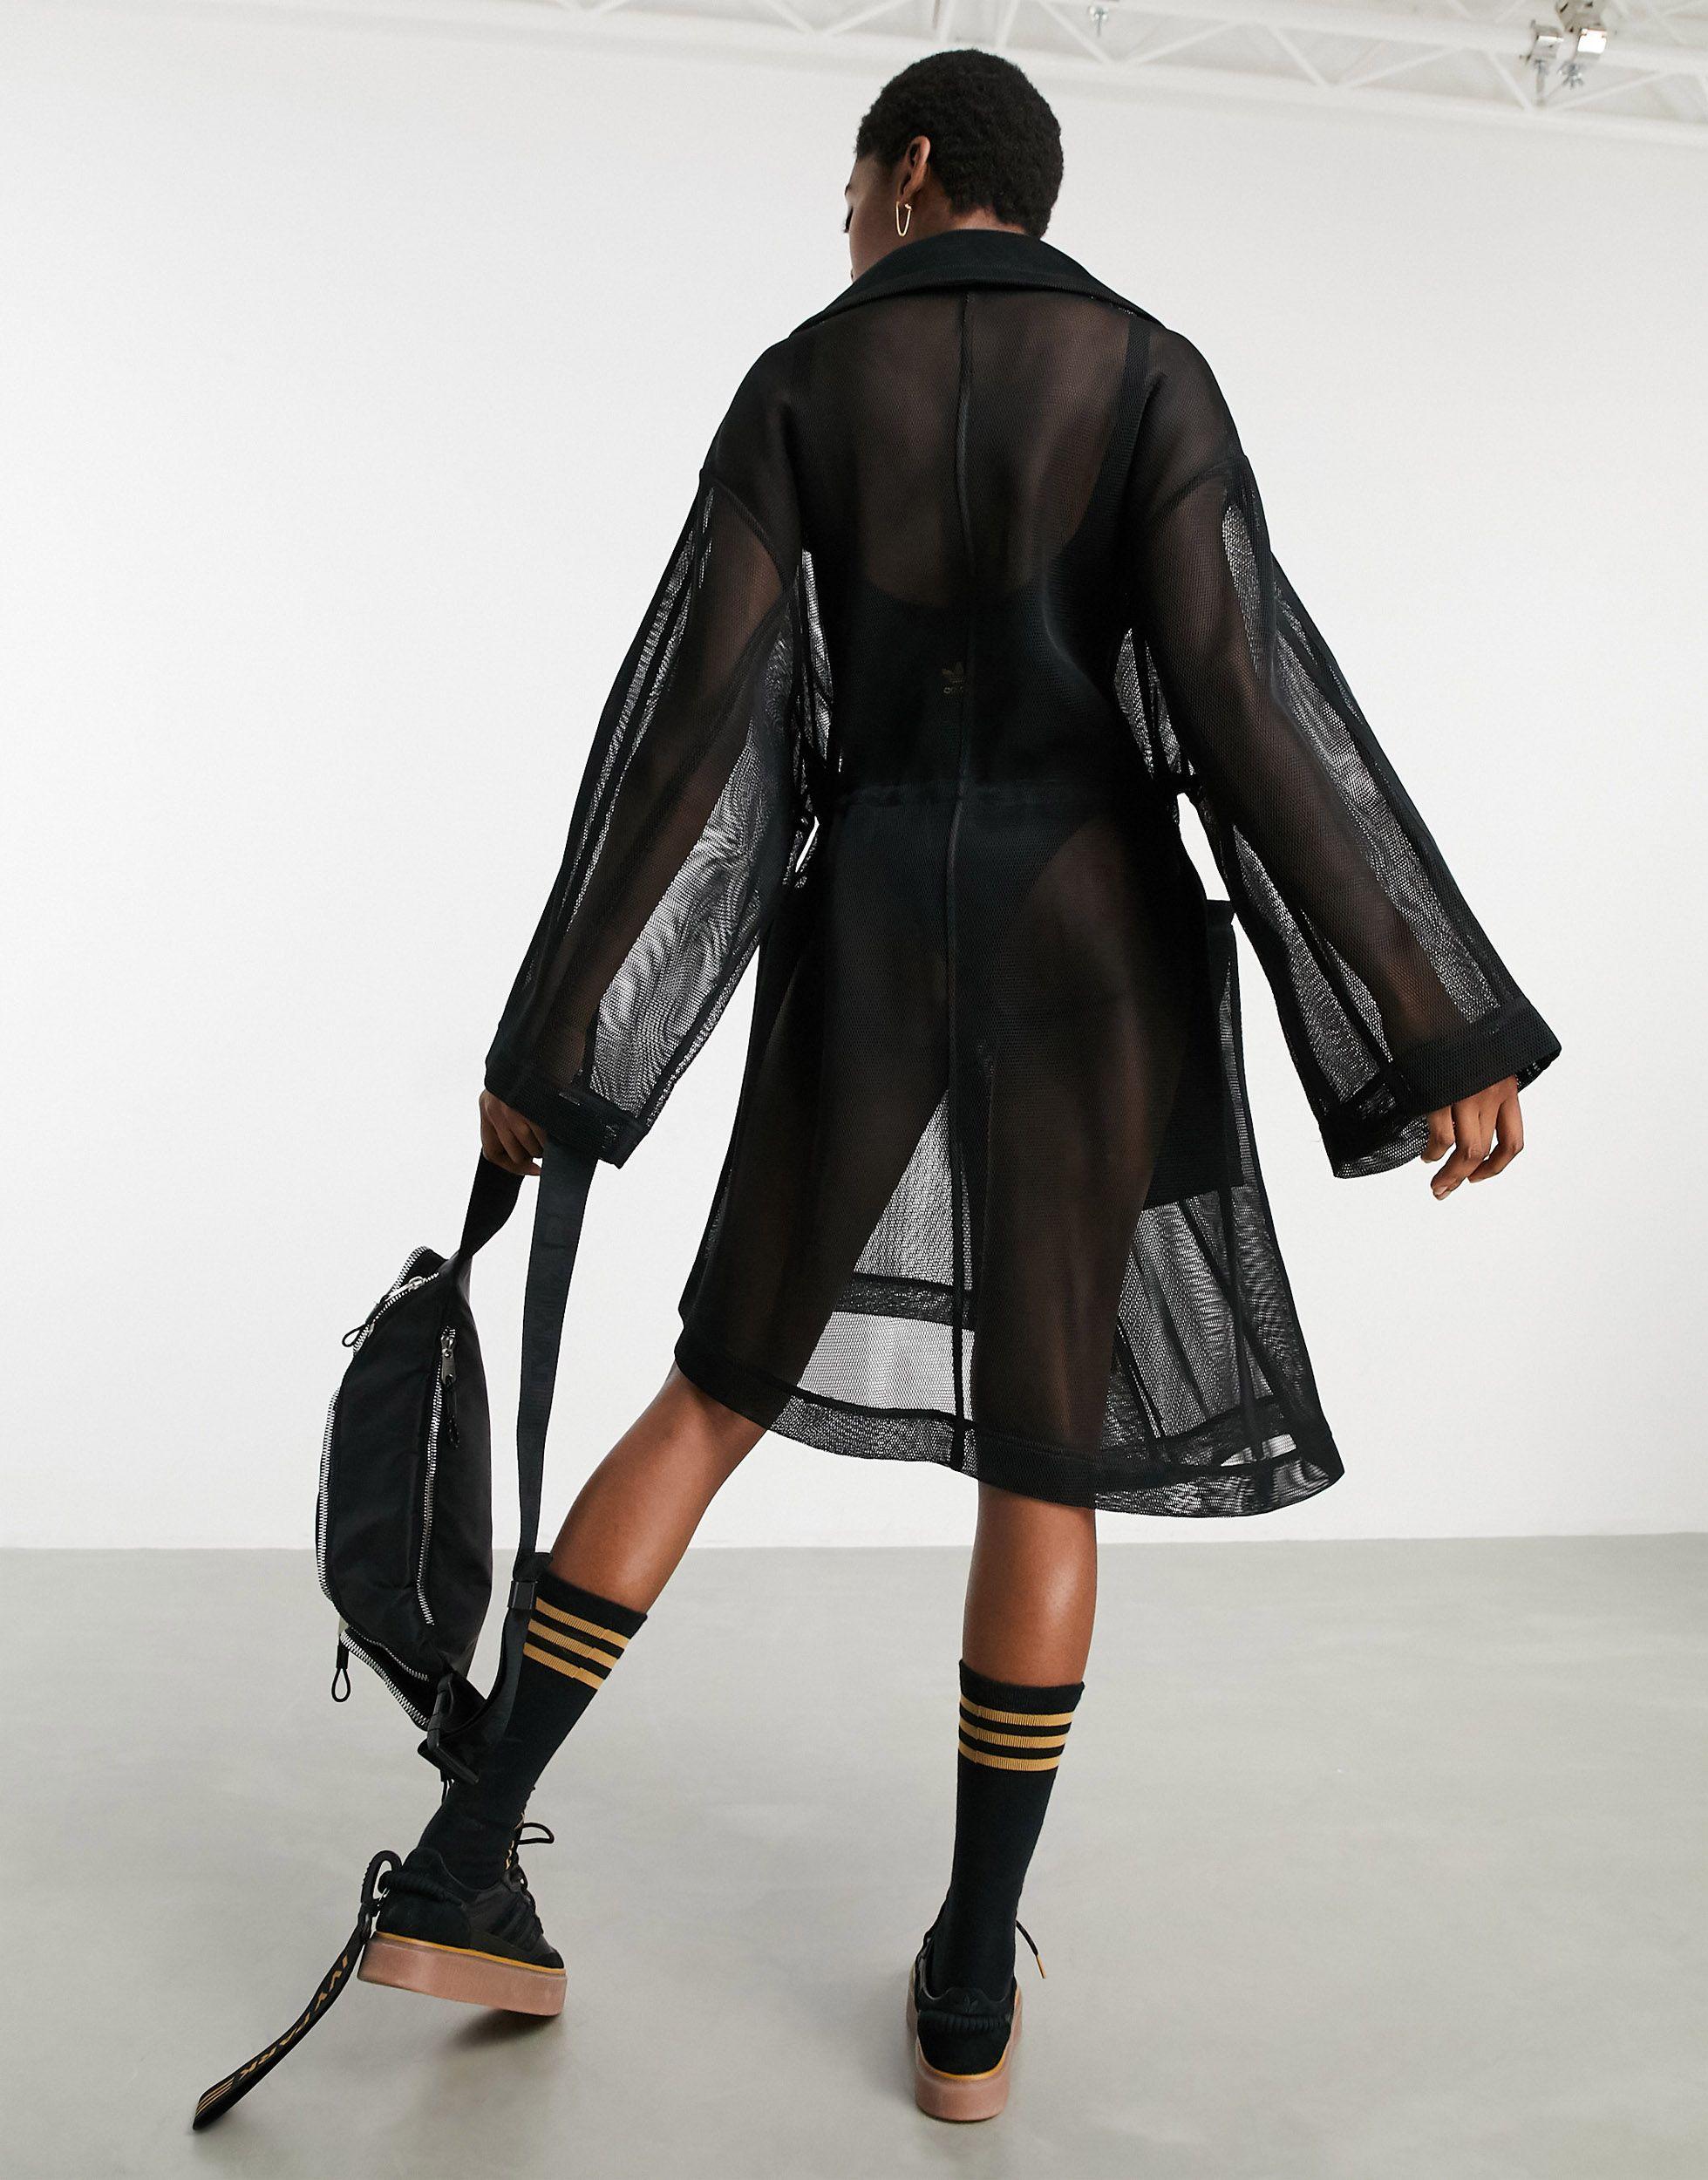 Ivy Park Adidas X Mesh Trench Coat in Black Lyst